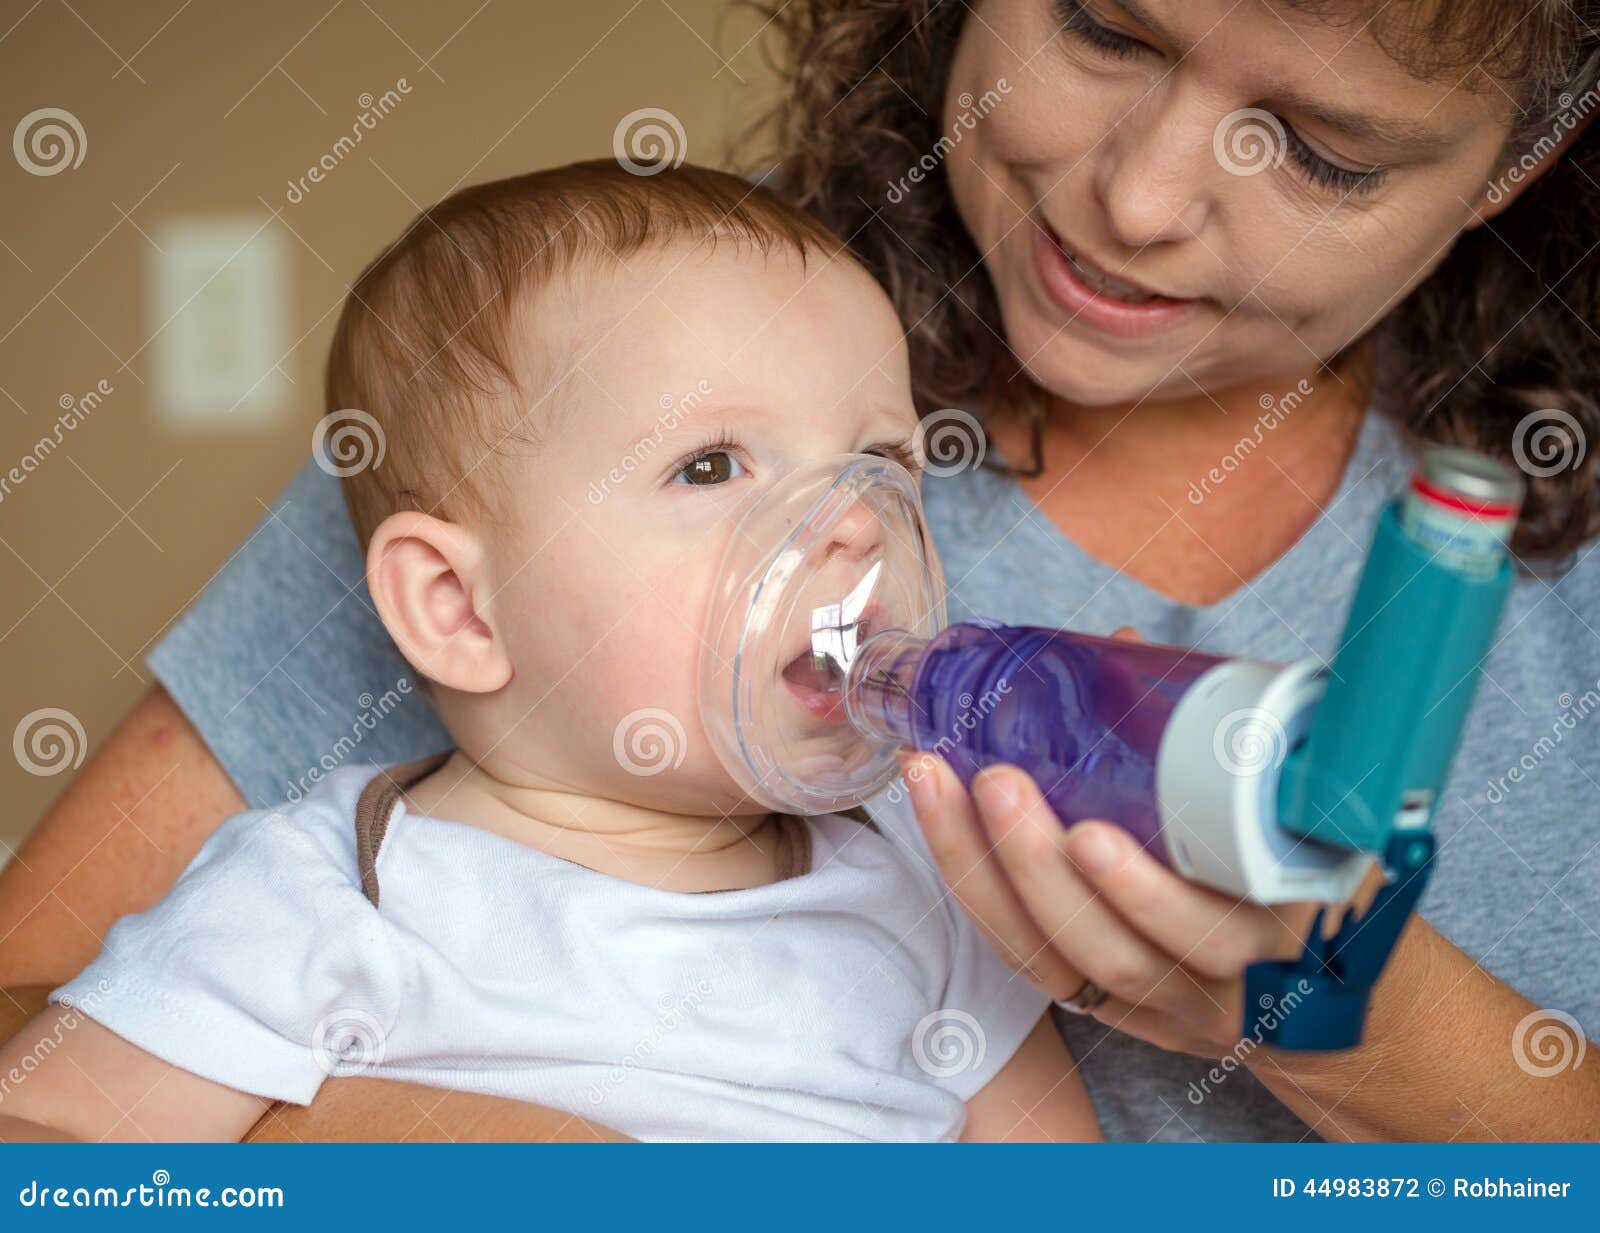 infant getting breathing treatment from mother